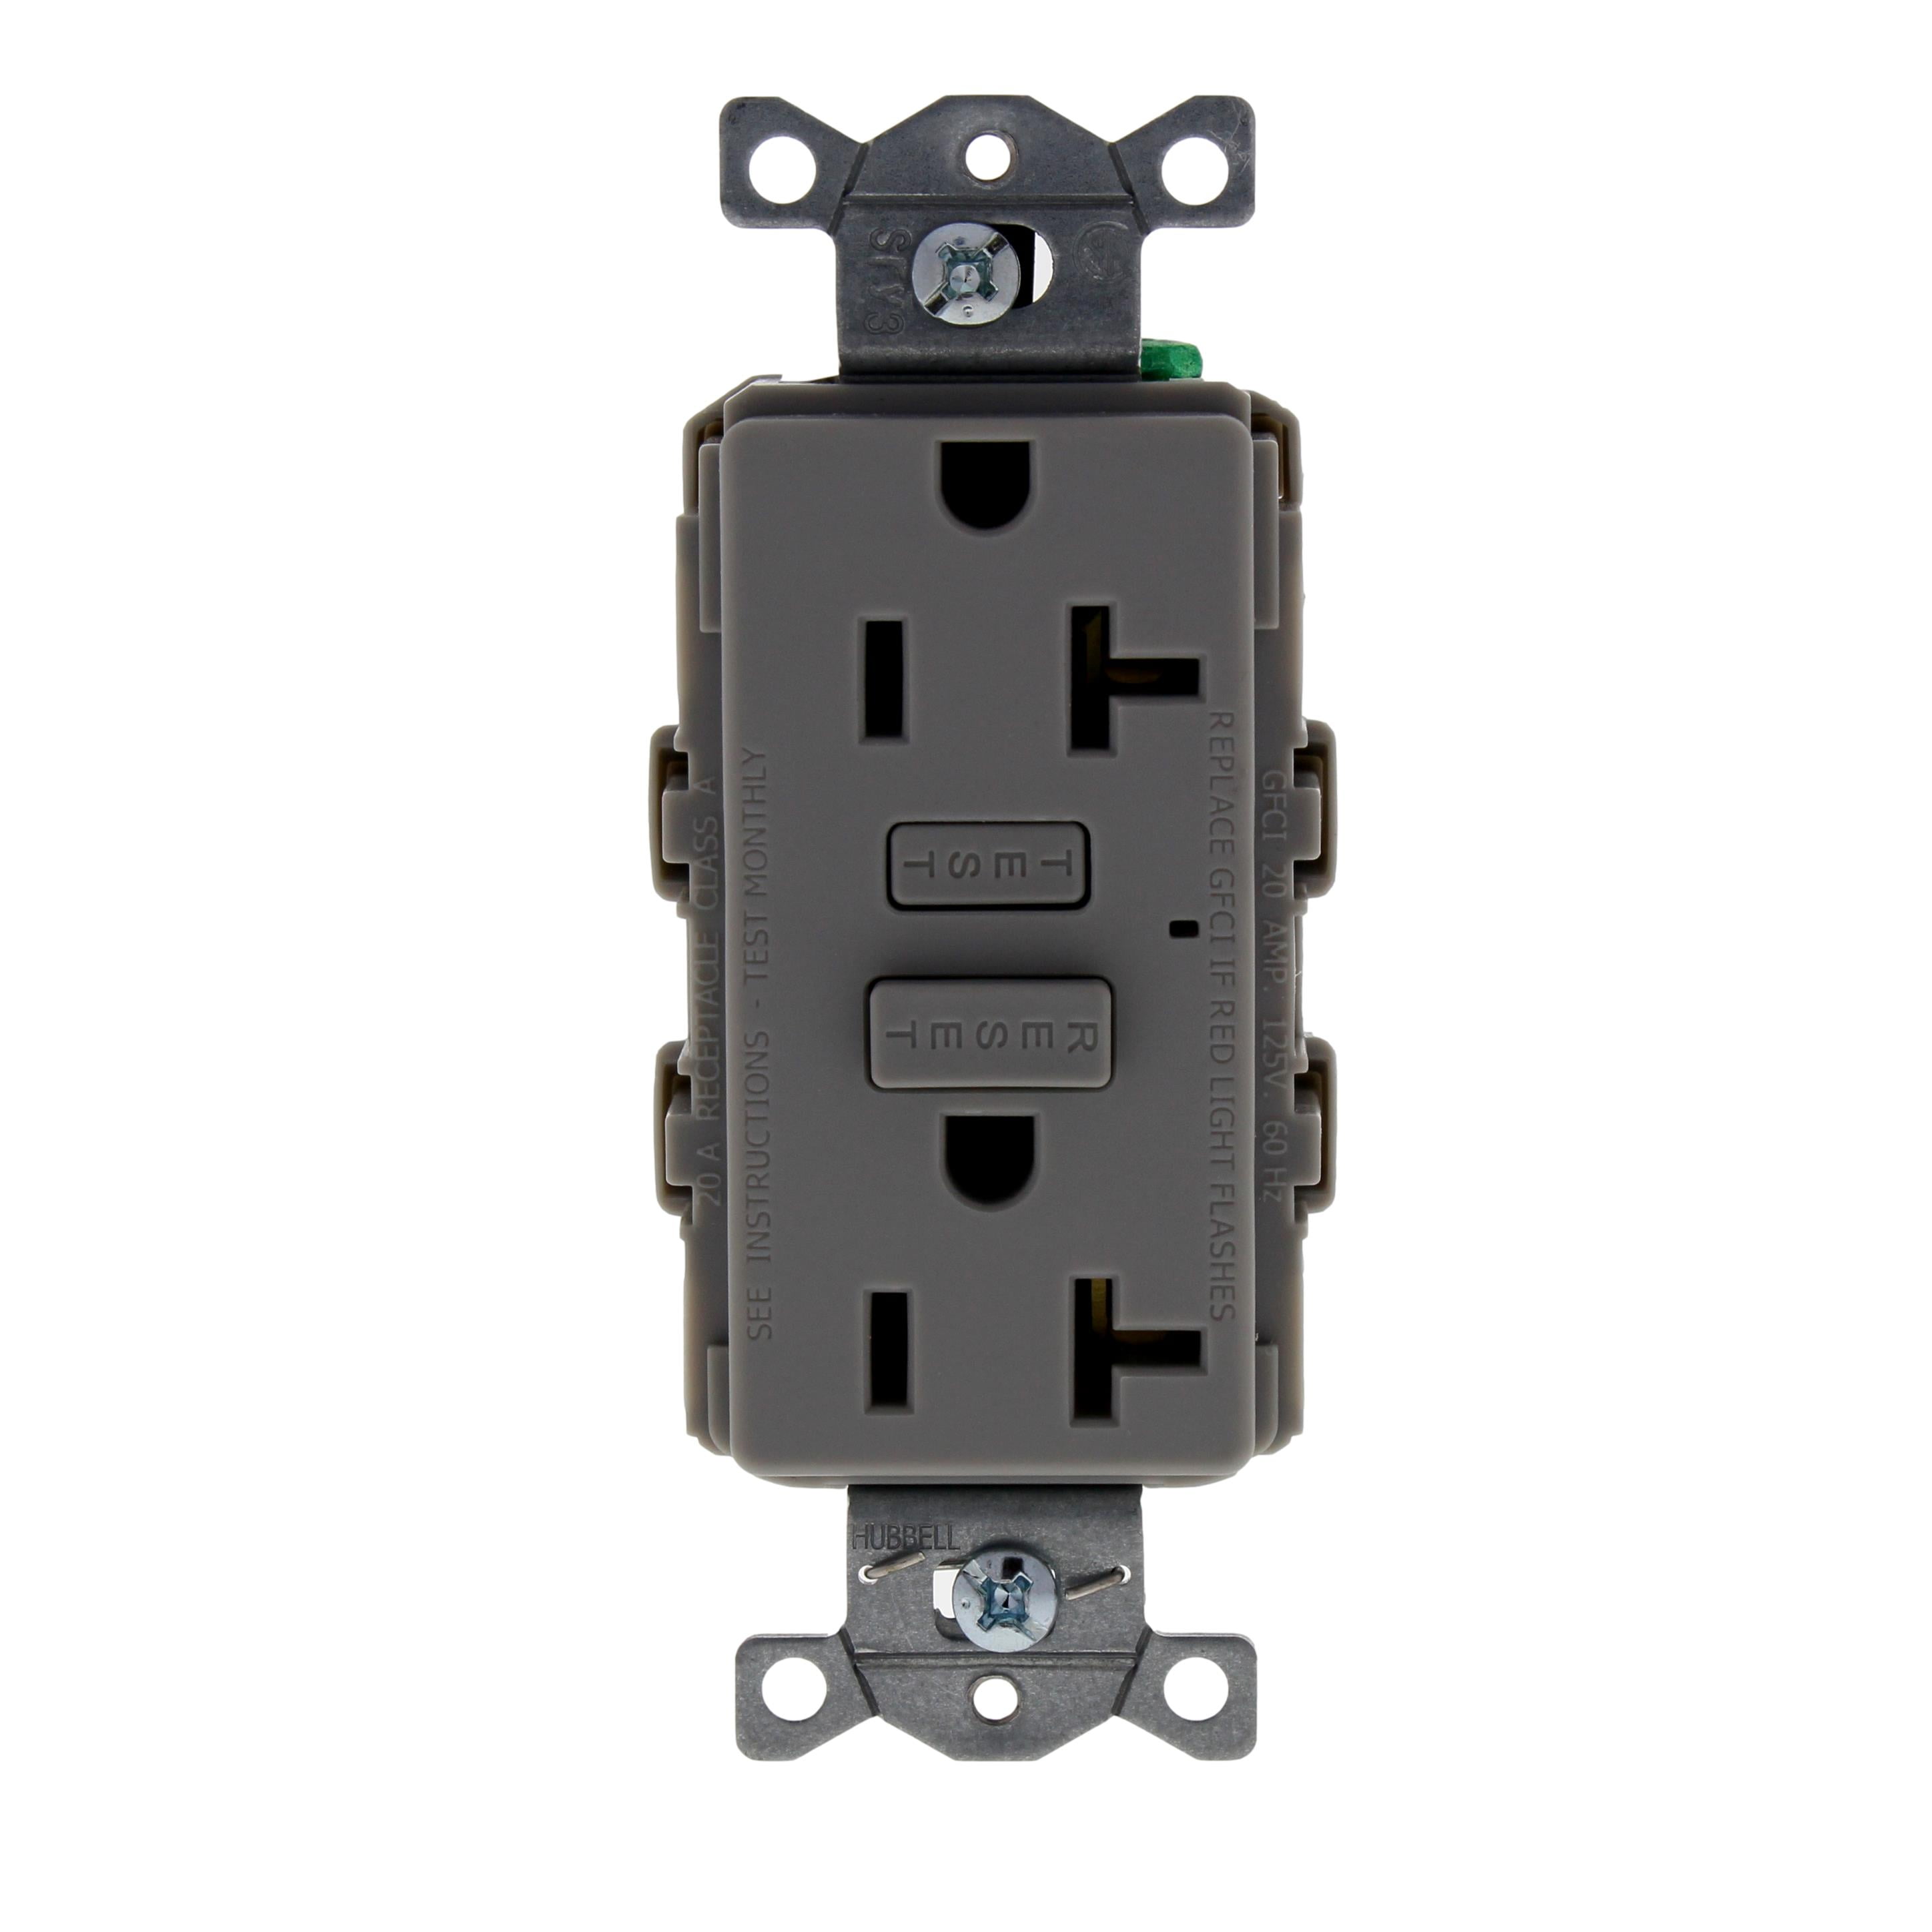 New Gray Outlets Hubbell GFCI Commercial Receptacles  20A  125V